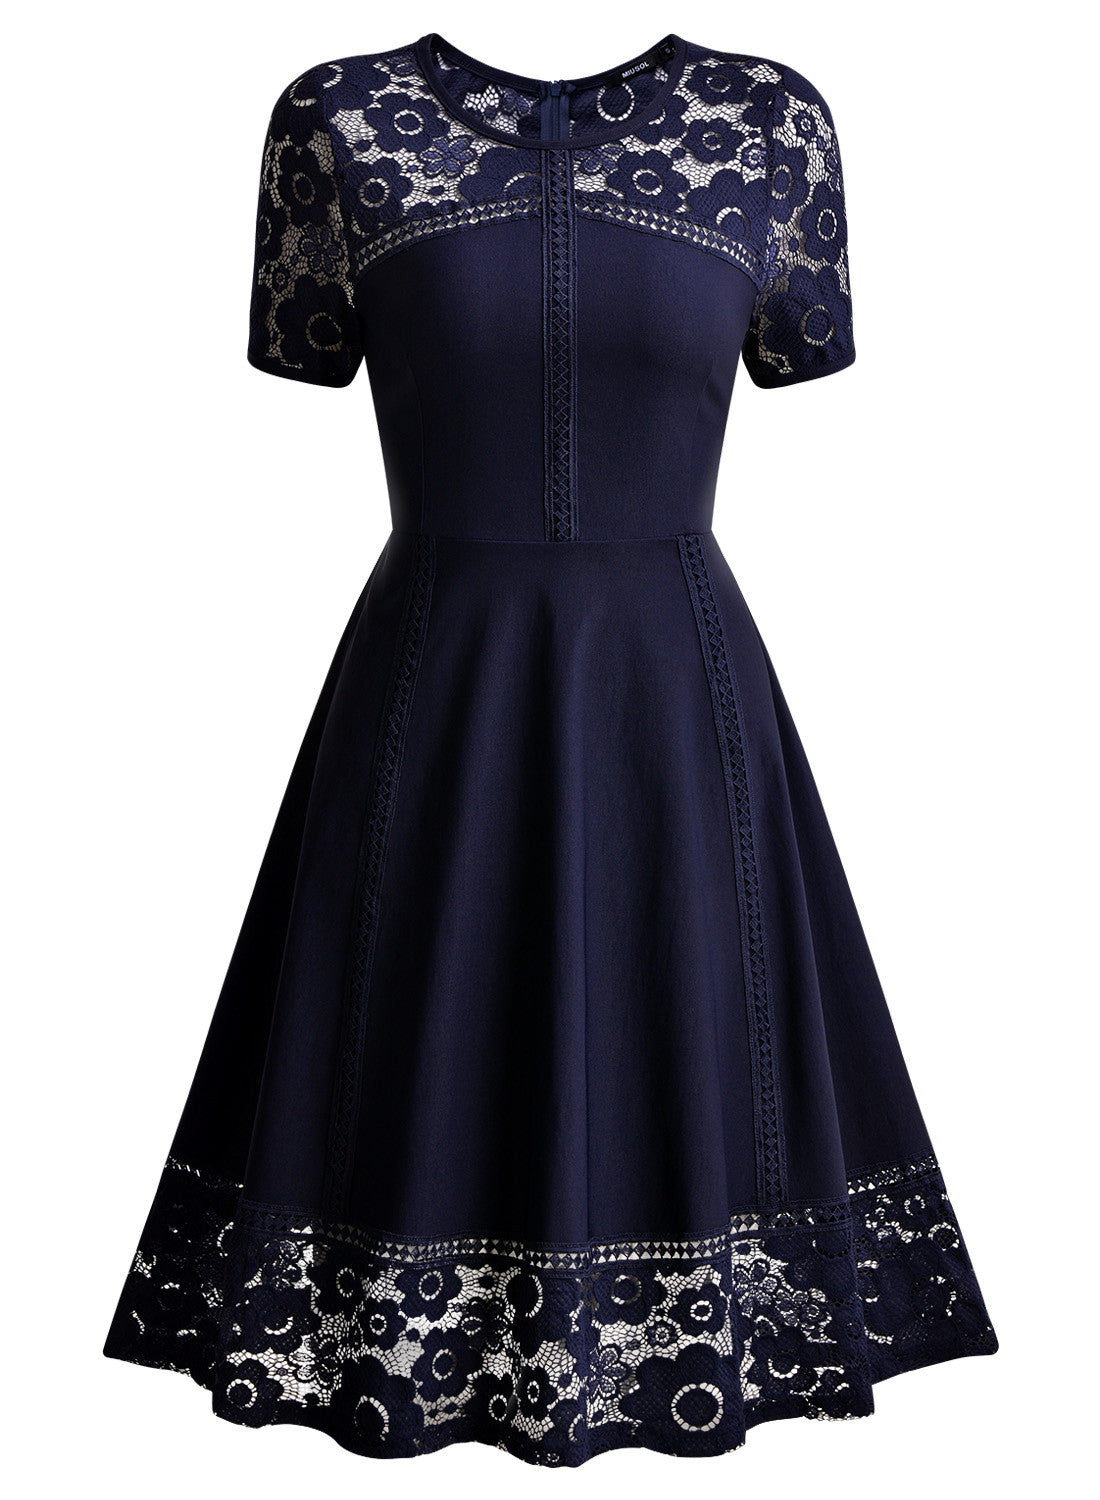 1950s floral embroidery lace dress